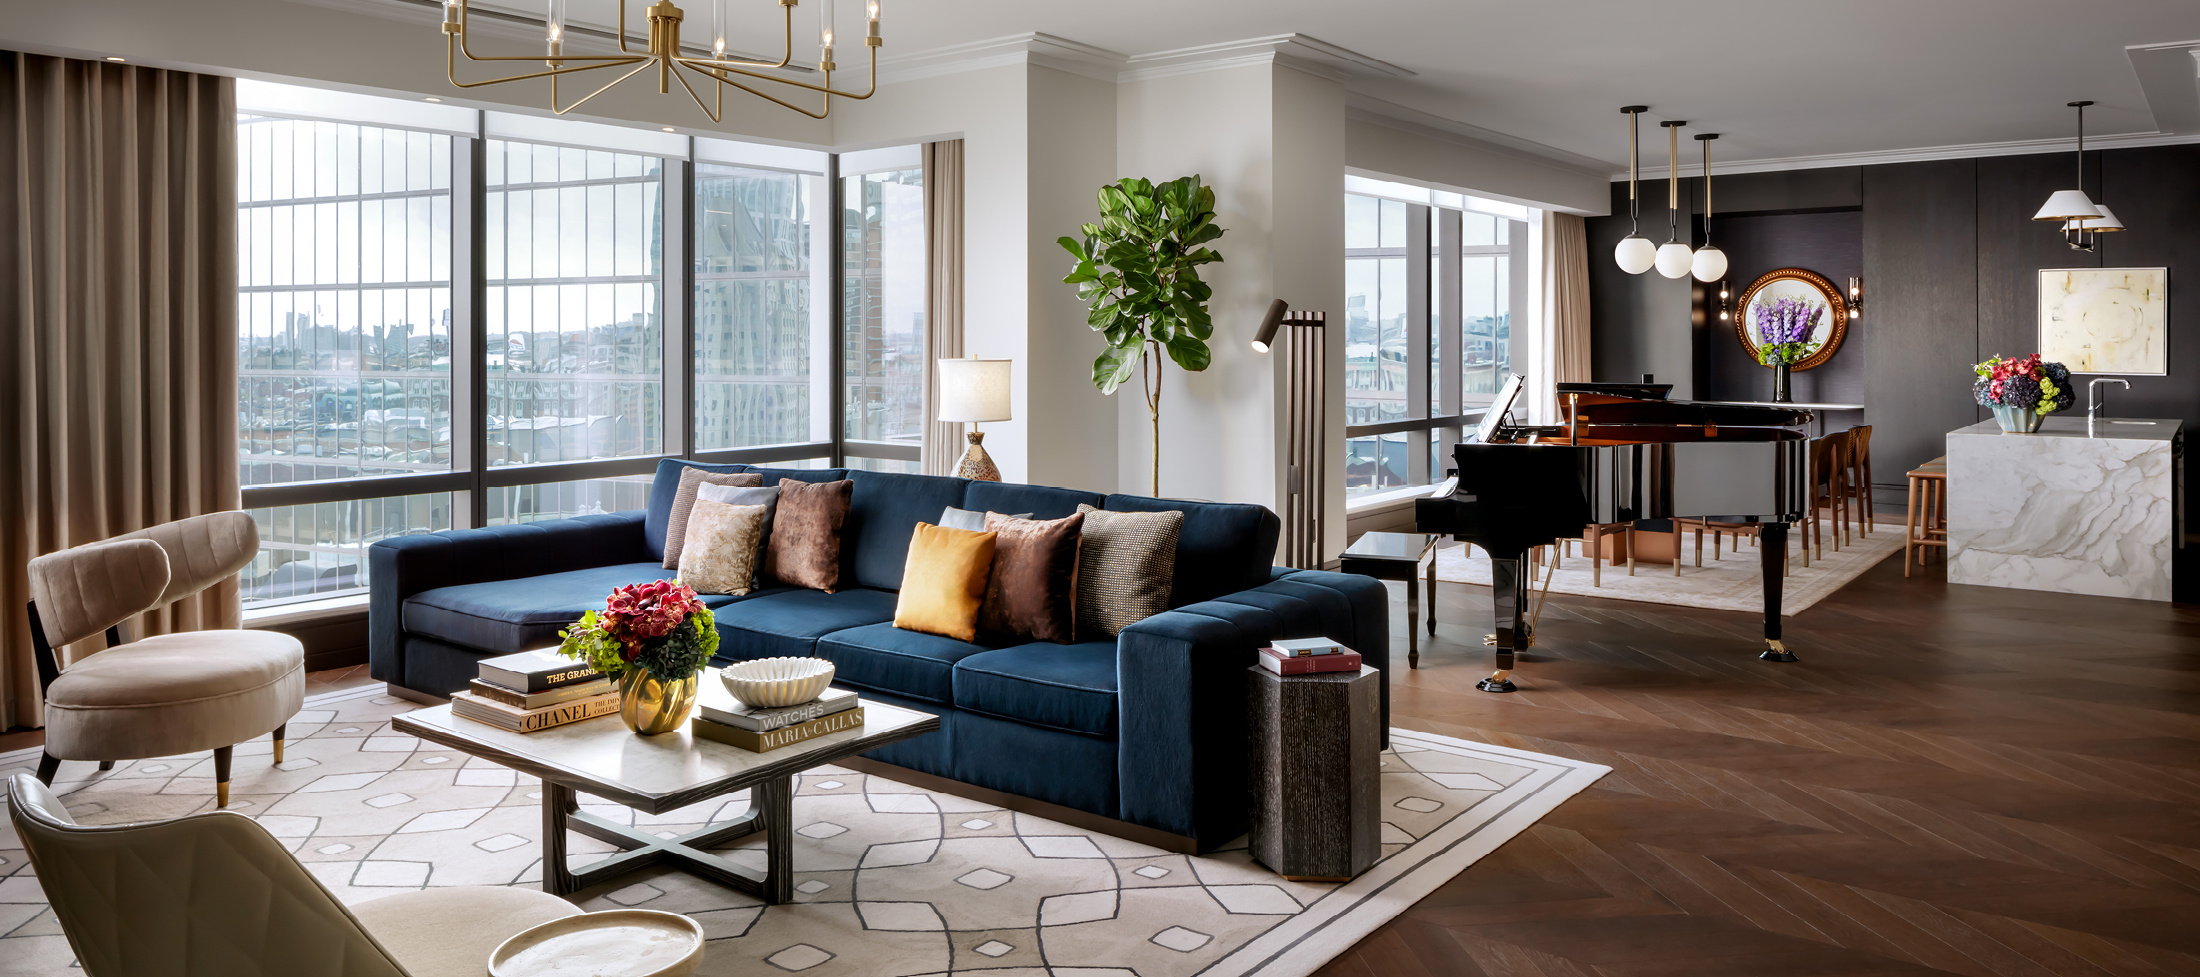 New Raffles Boston Hotel Offers Sustainable, Luxurious Experience